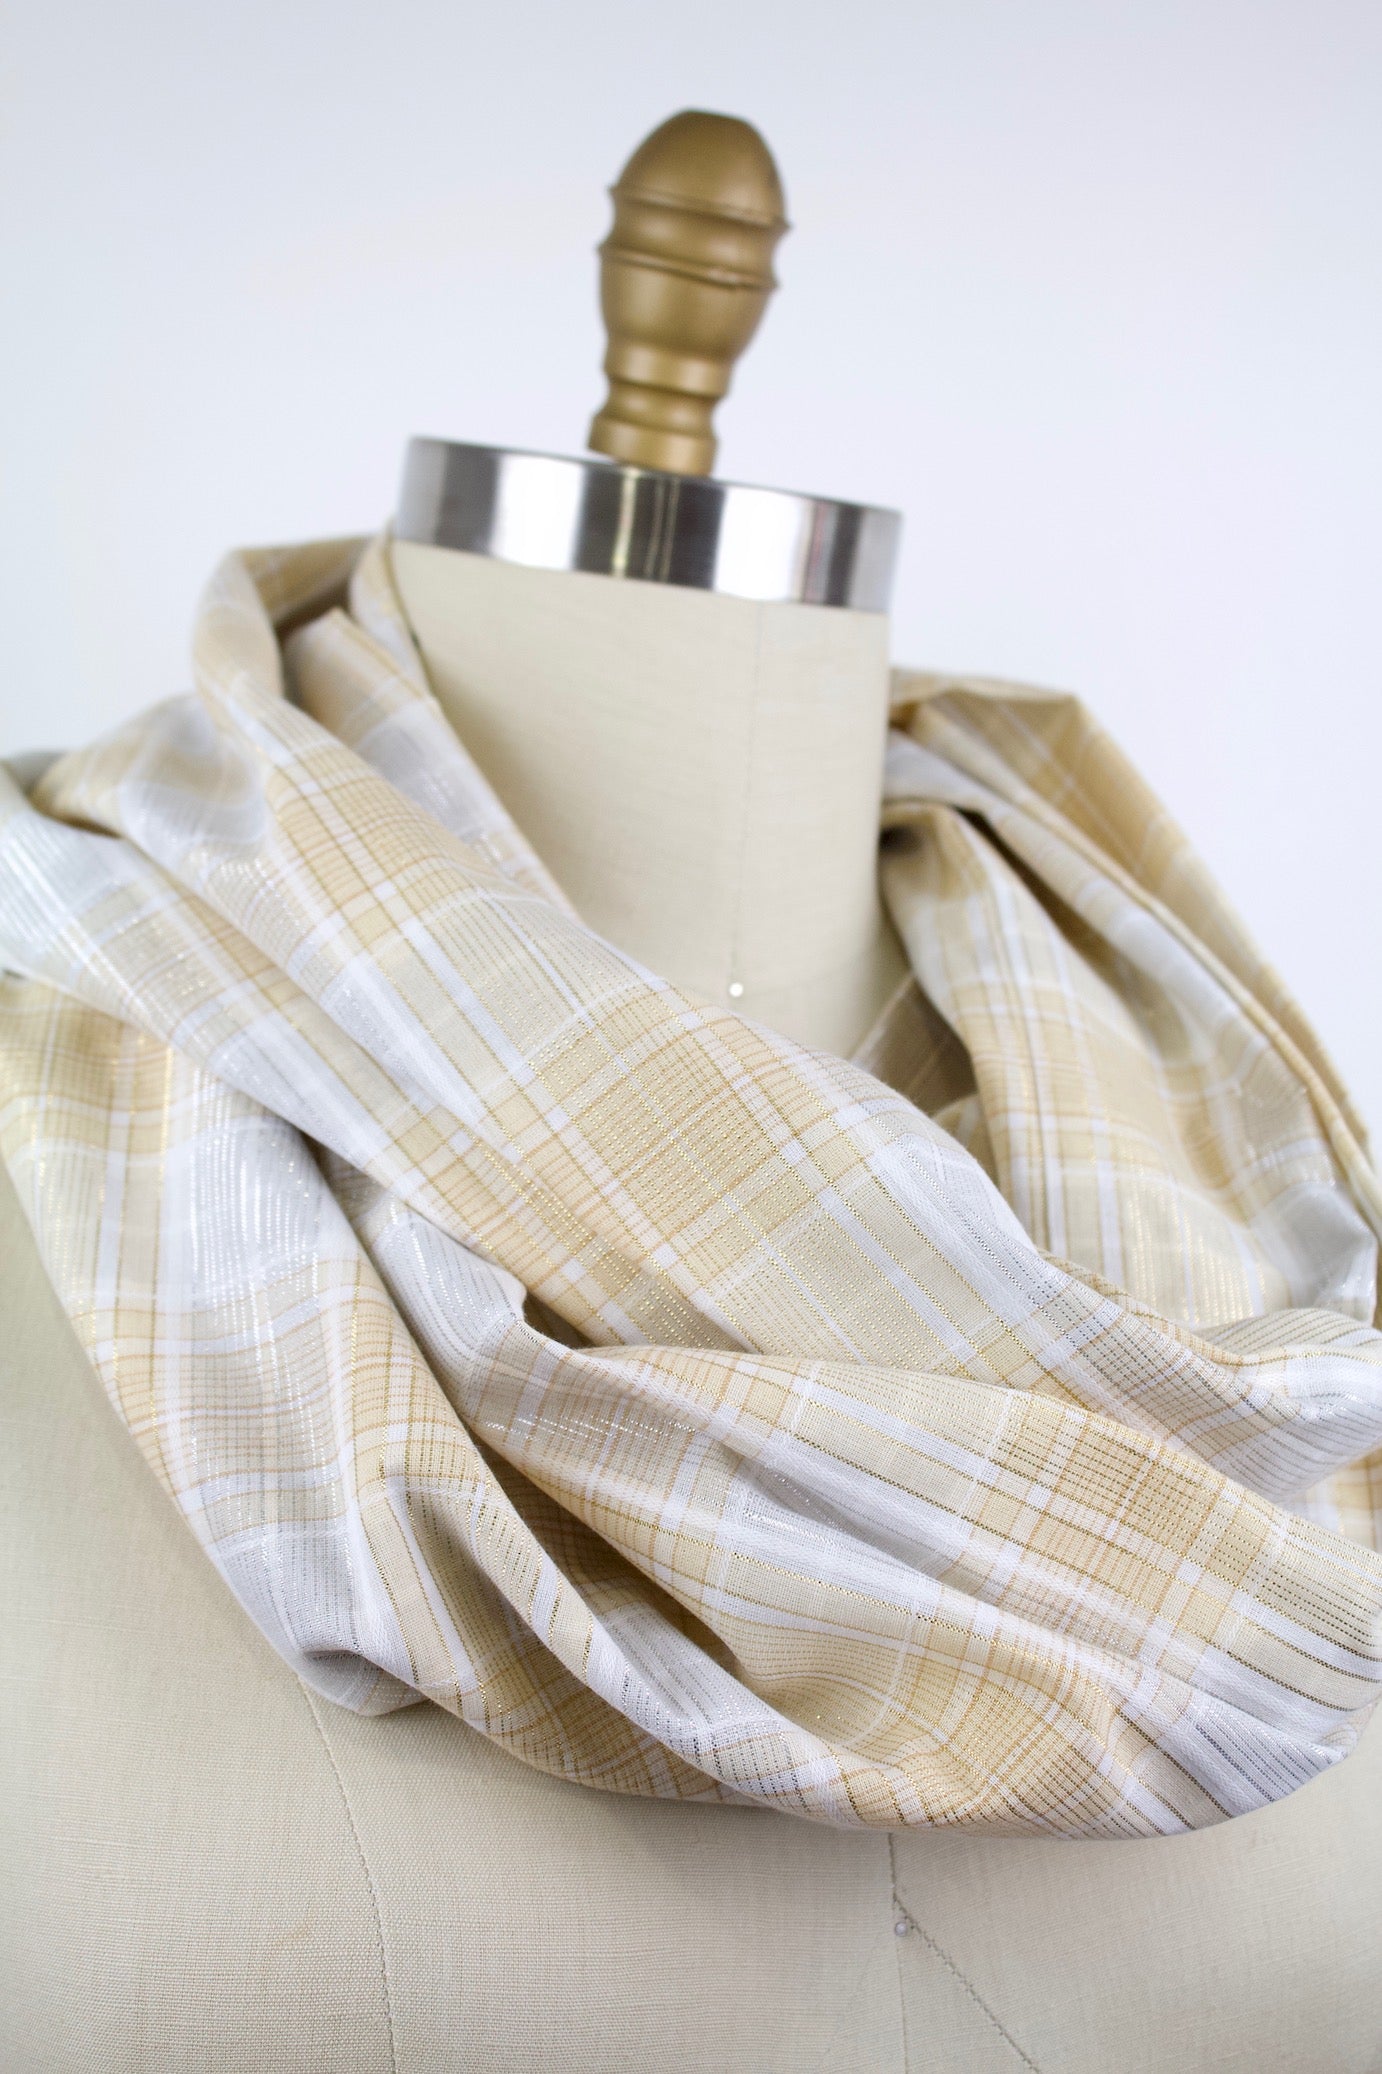 Metallic Plaid Infinity Scarf-The Blue Peony-Category_Infinity Scarf,Color_Cream,Color_Gold,Department_Personal Accessory,Material_Cotton,Pattern_Plaid